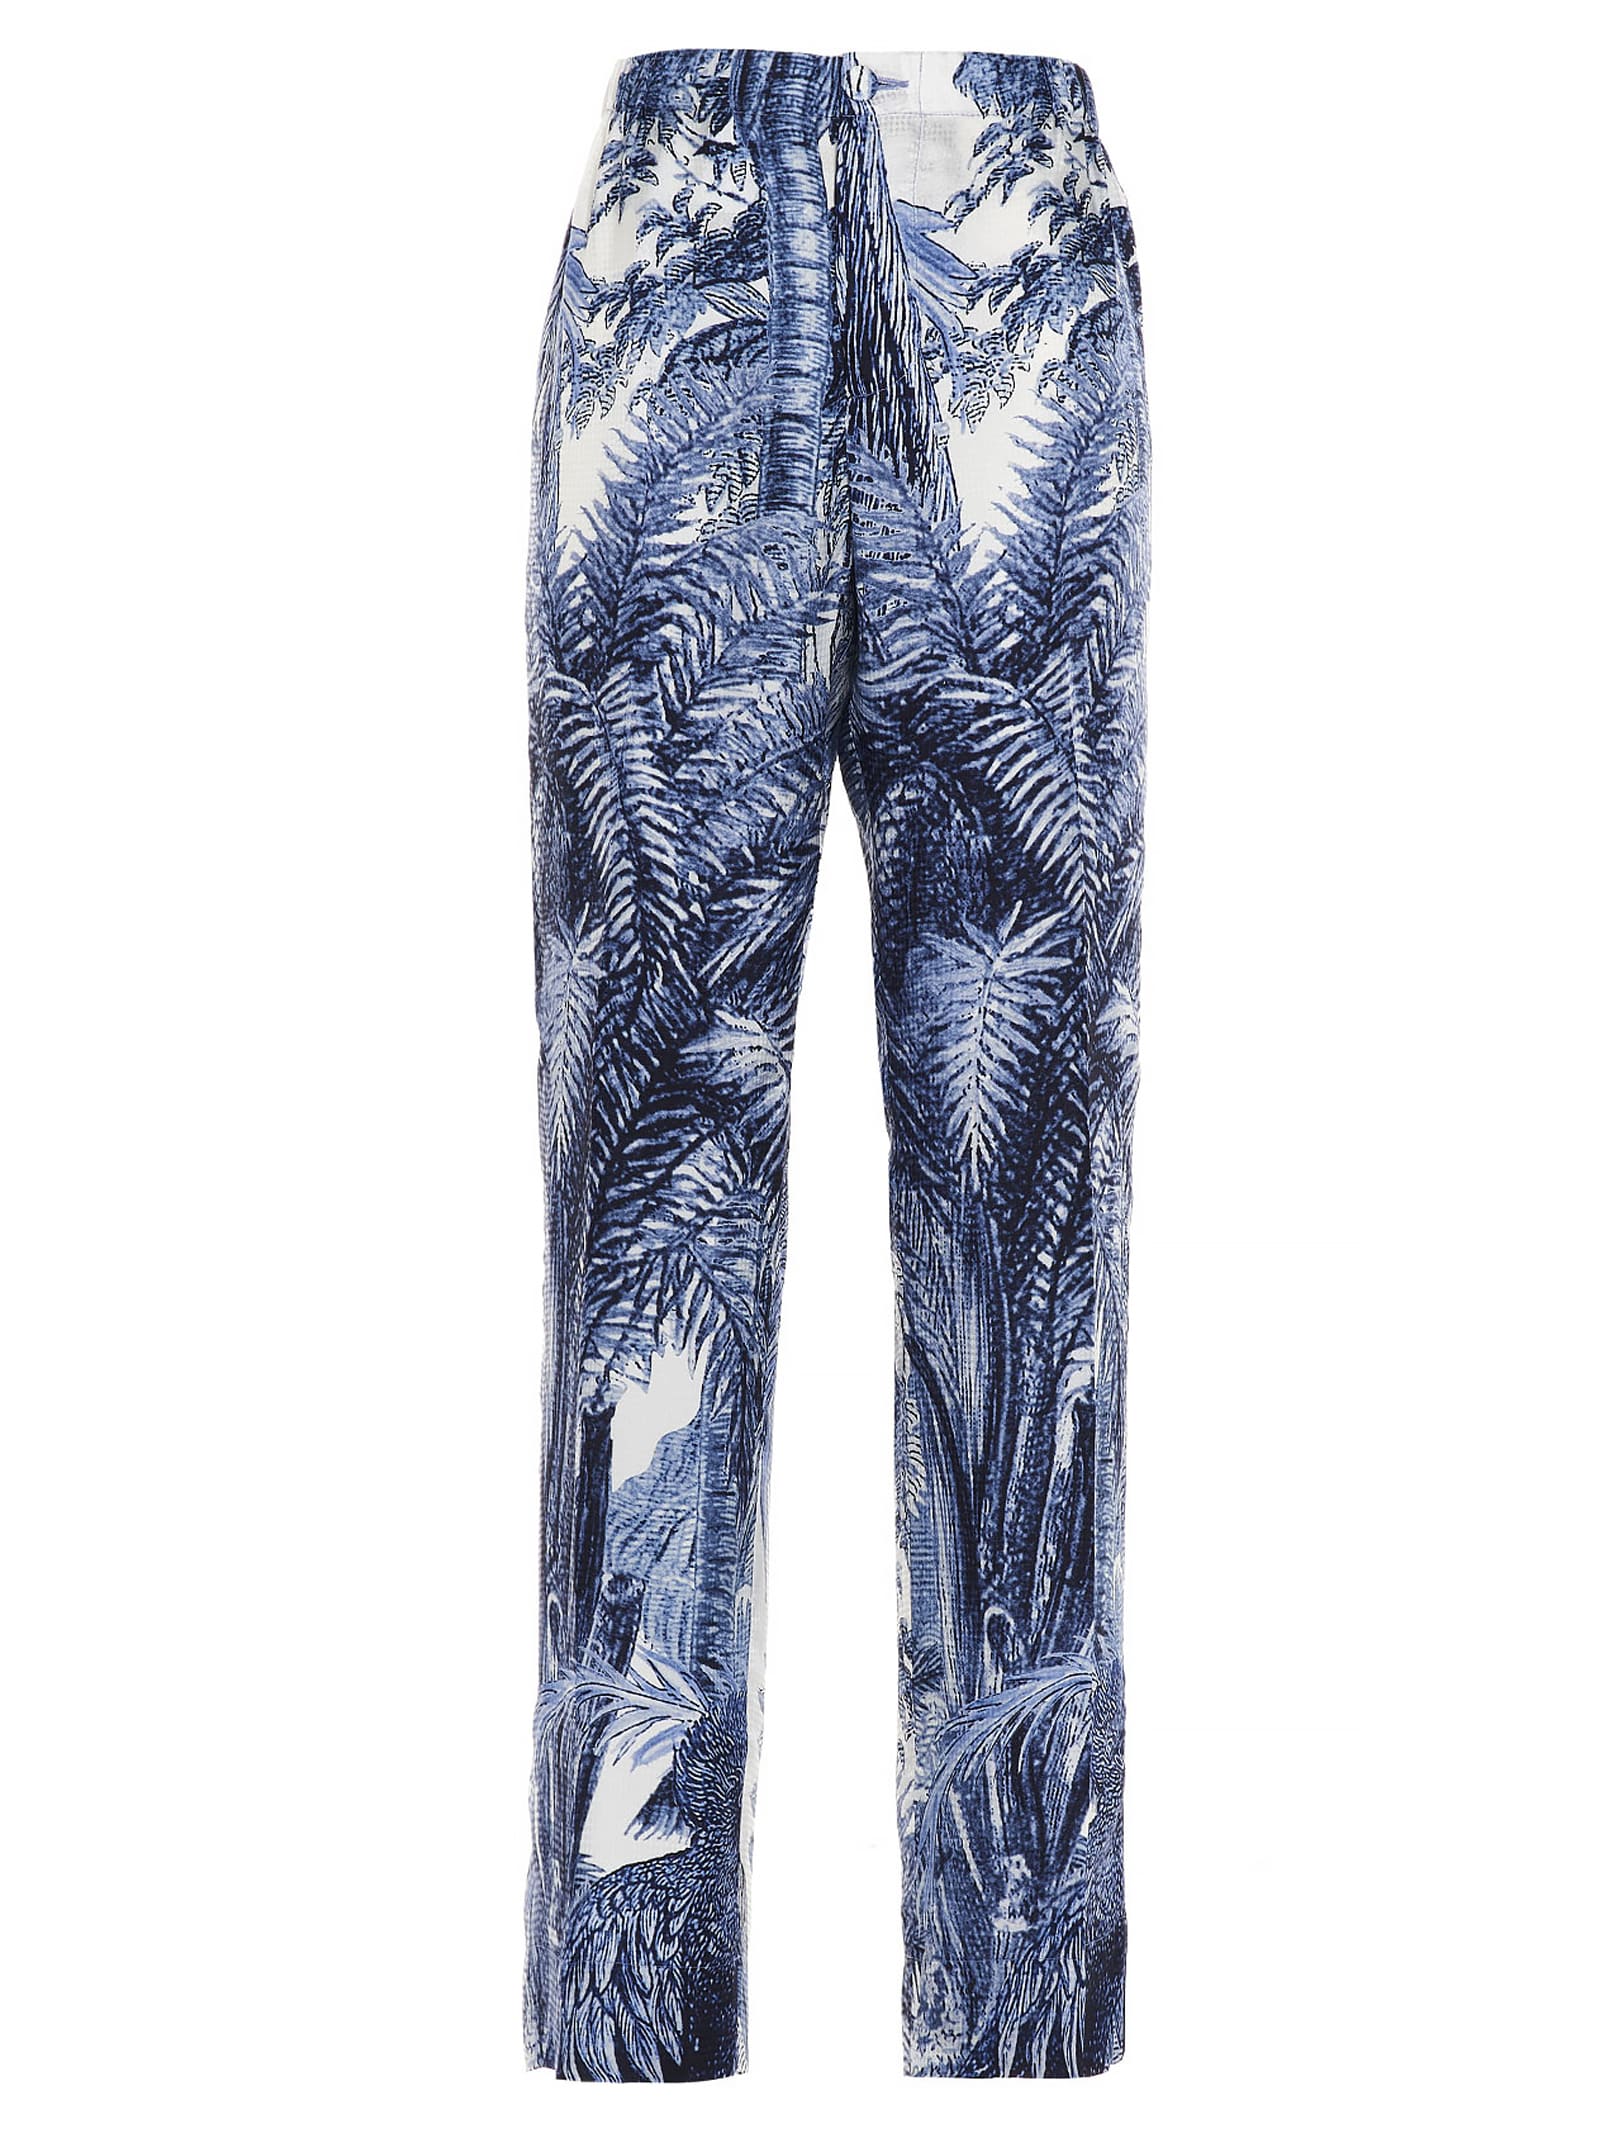 For Restless Sleepers huge Jungle Pants